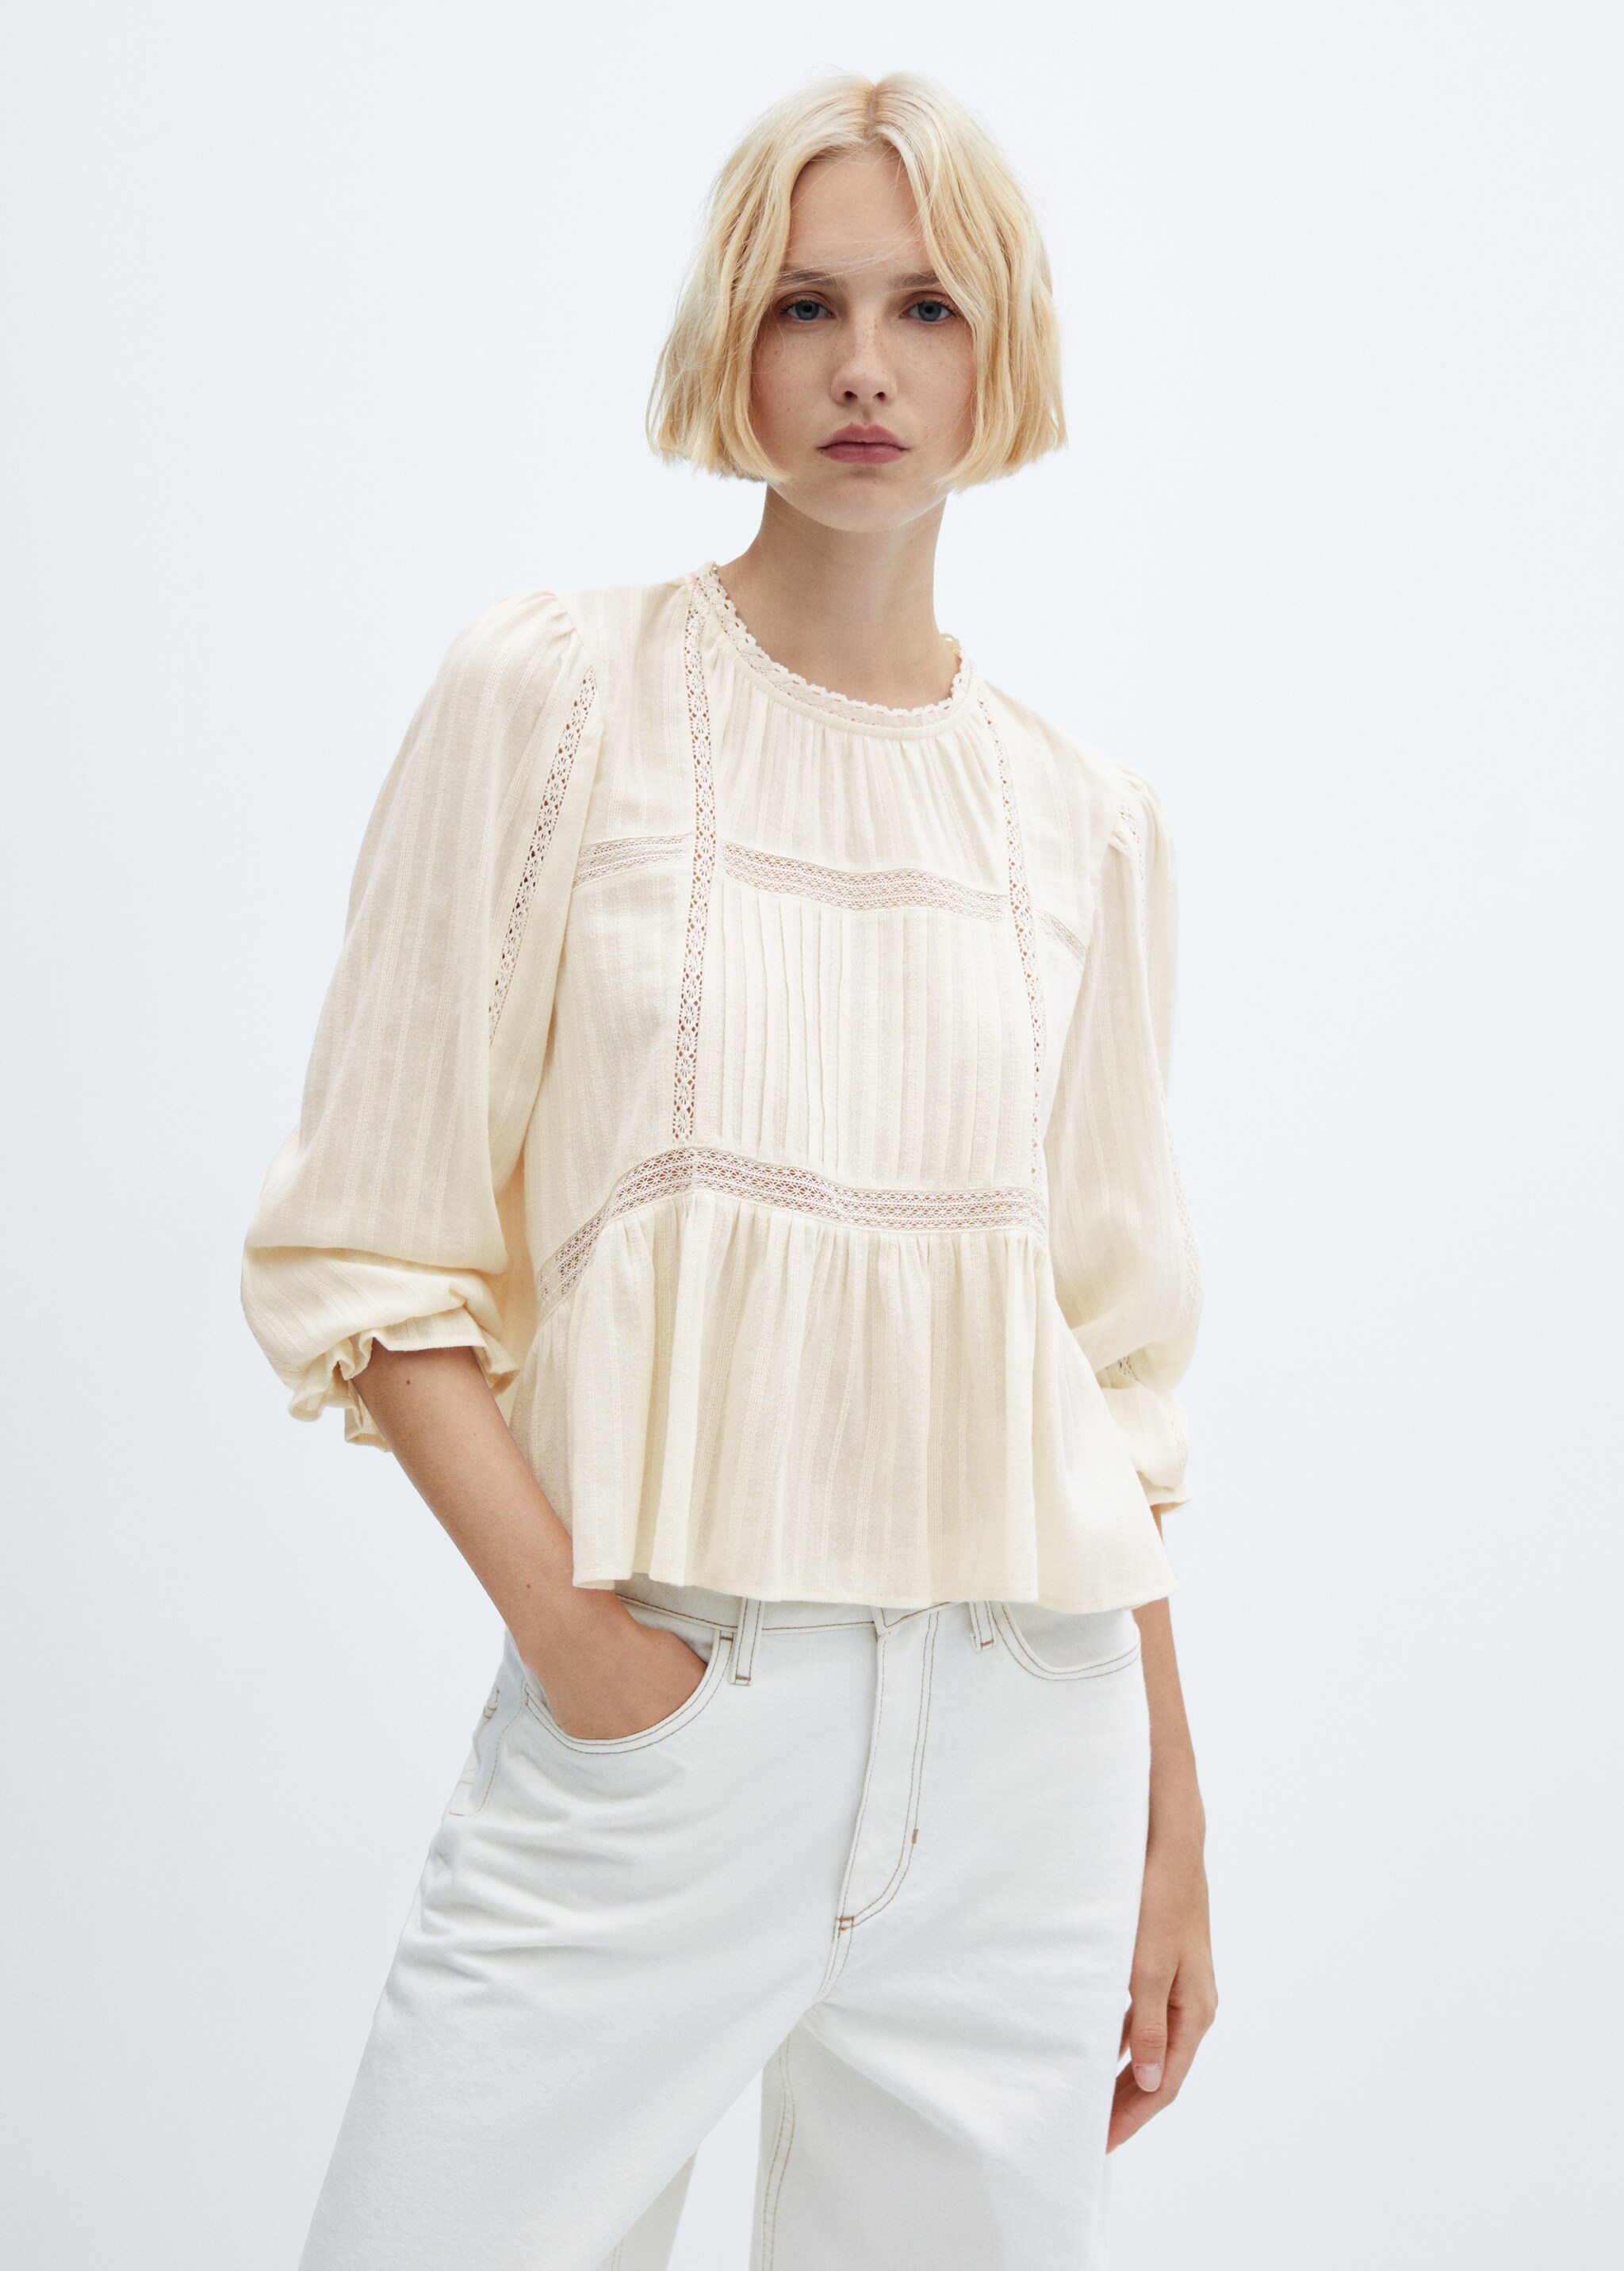 Embroidered blouse with puffed sleeves - Medium plane